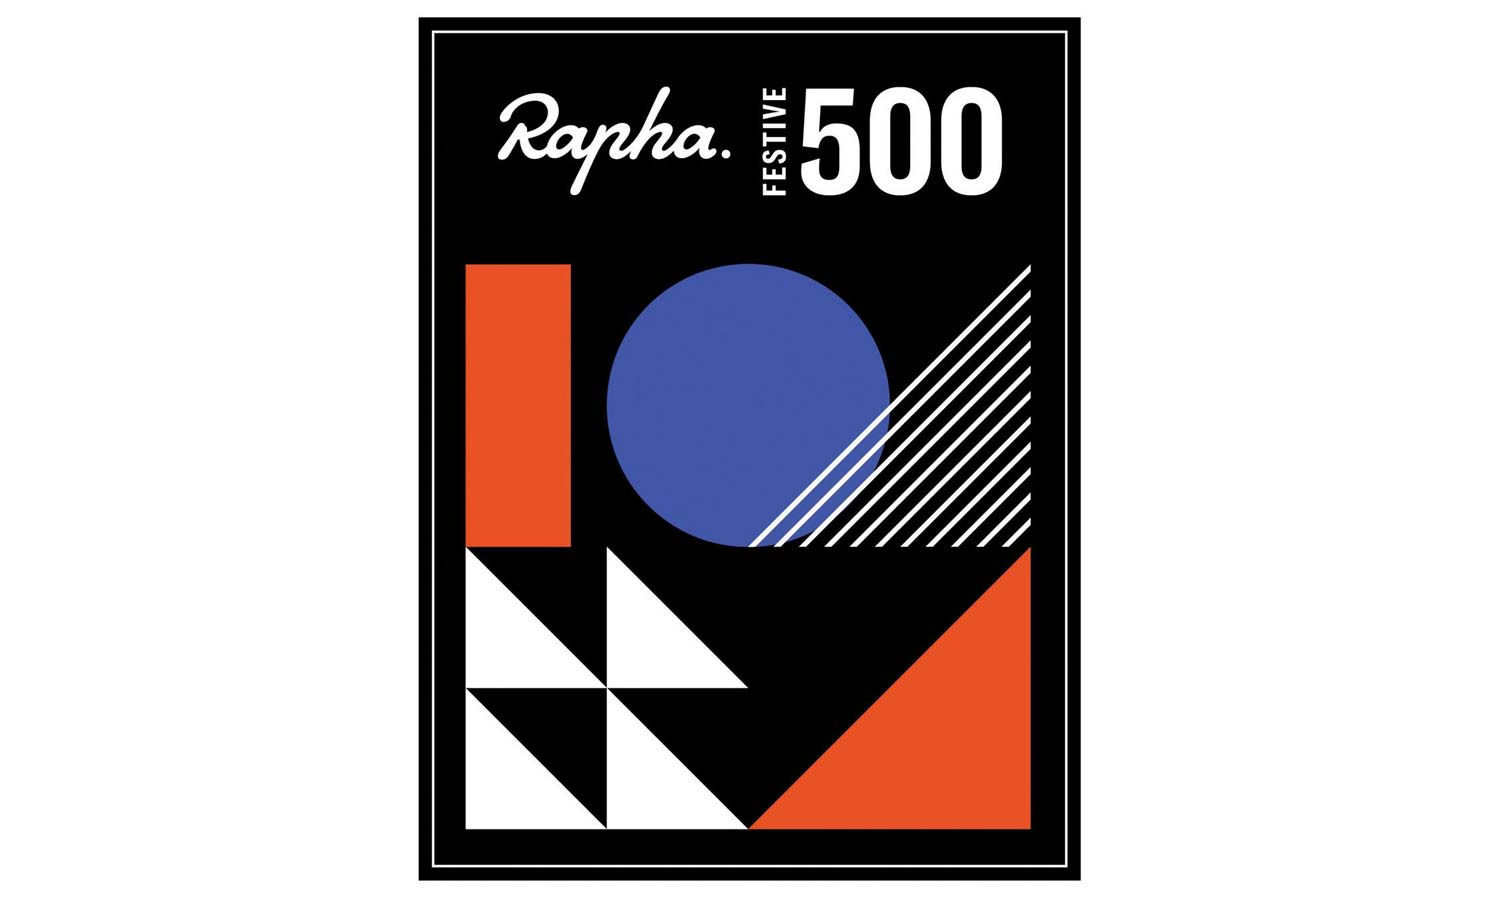 2019 Rapha Festive 500 10th anniversary edition, ride 500km outside from Christmas to New Years building fitness over the holidays